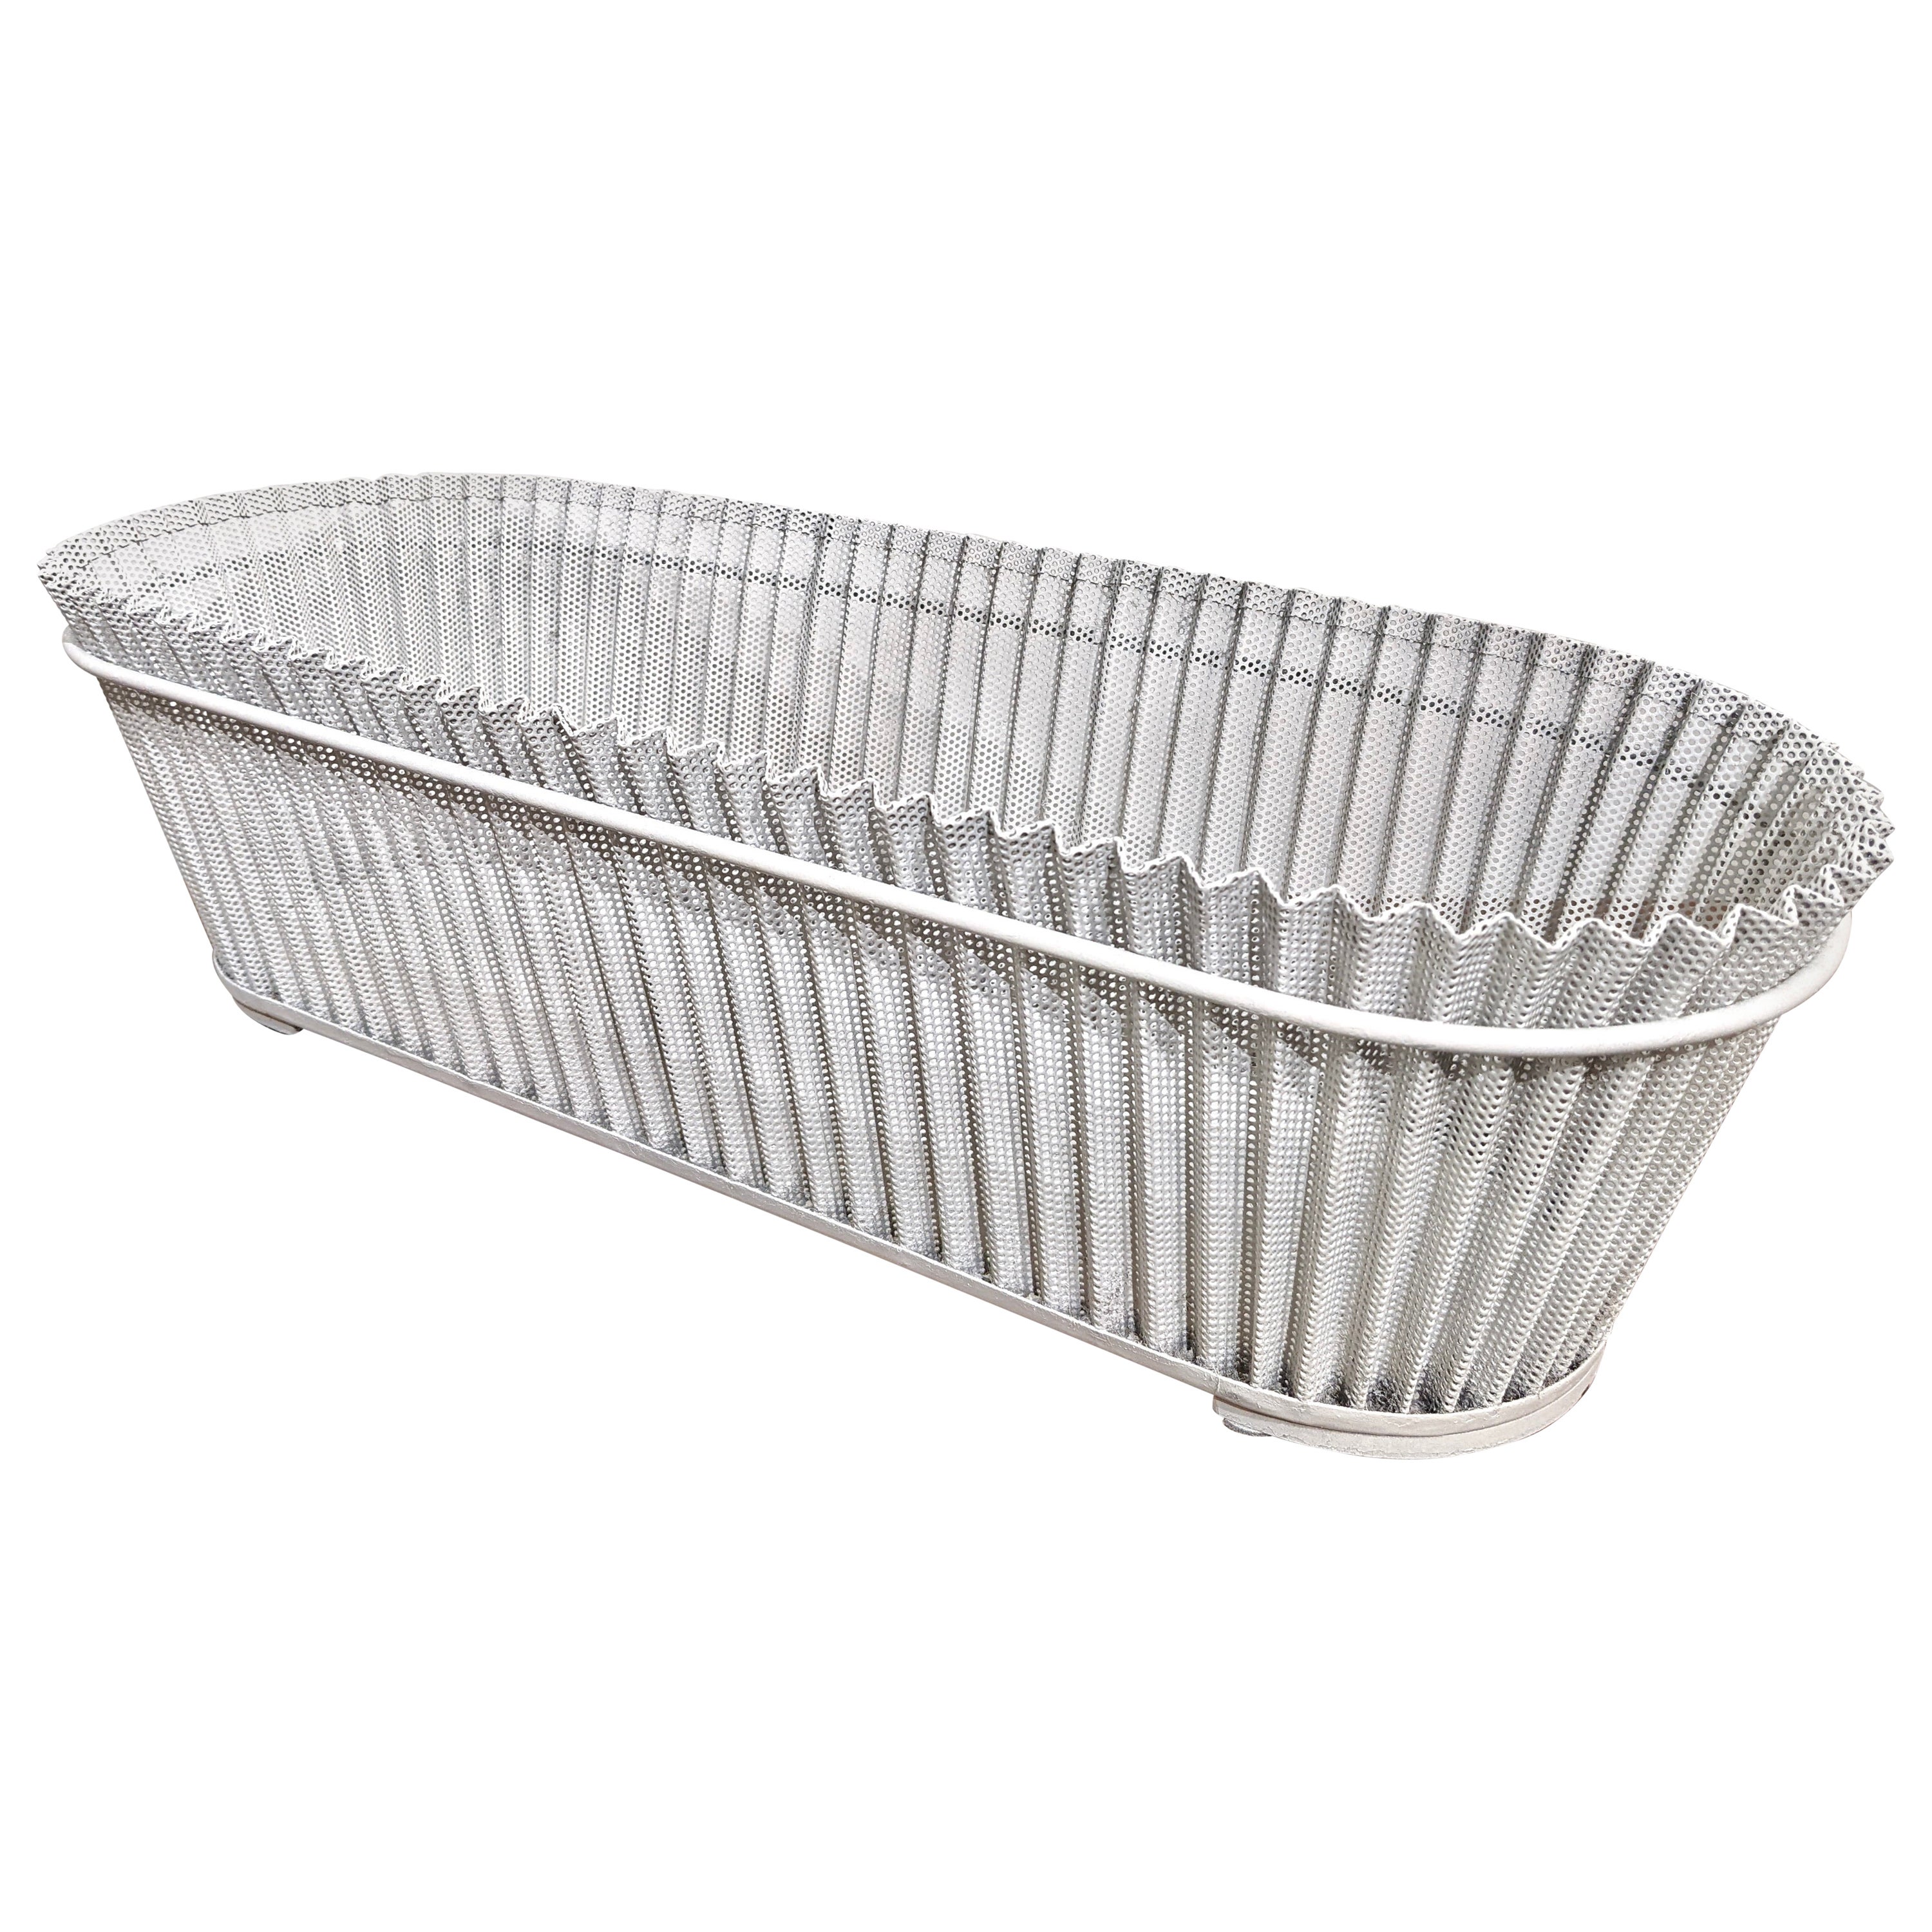 Planter in White Perforated Sheet Metal by Mathieu Matégot For Sale